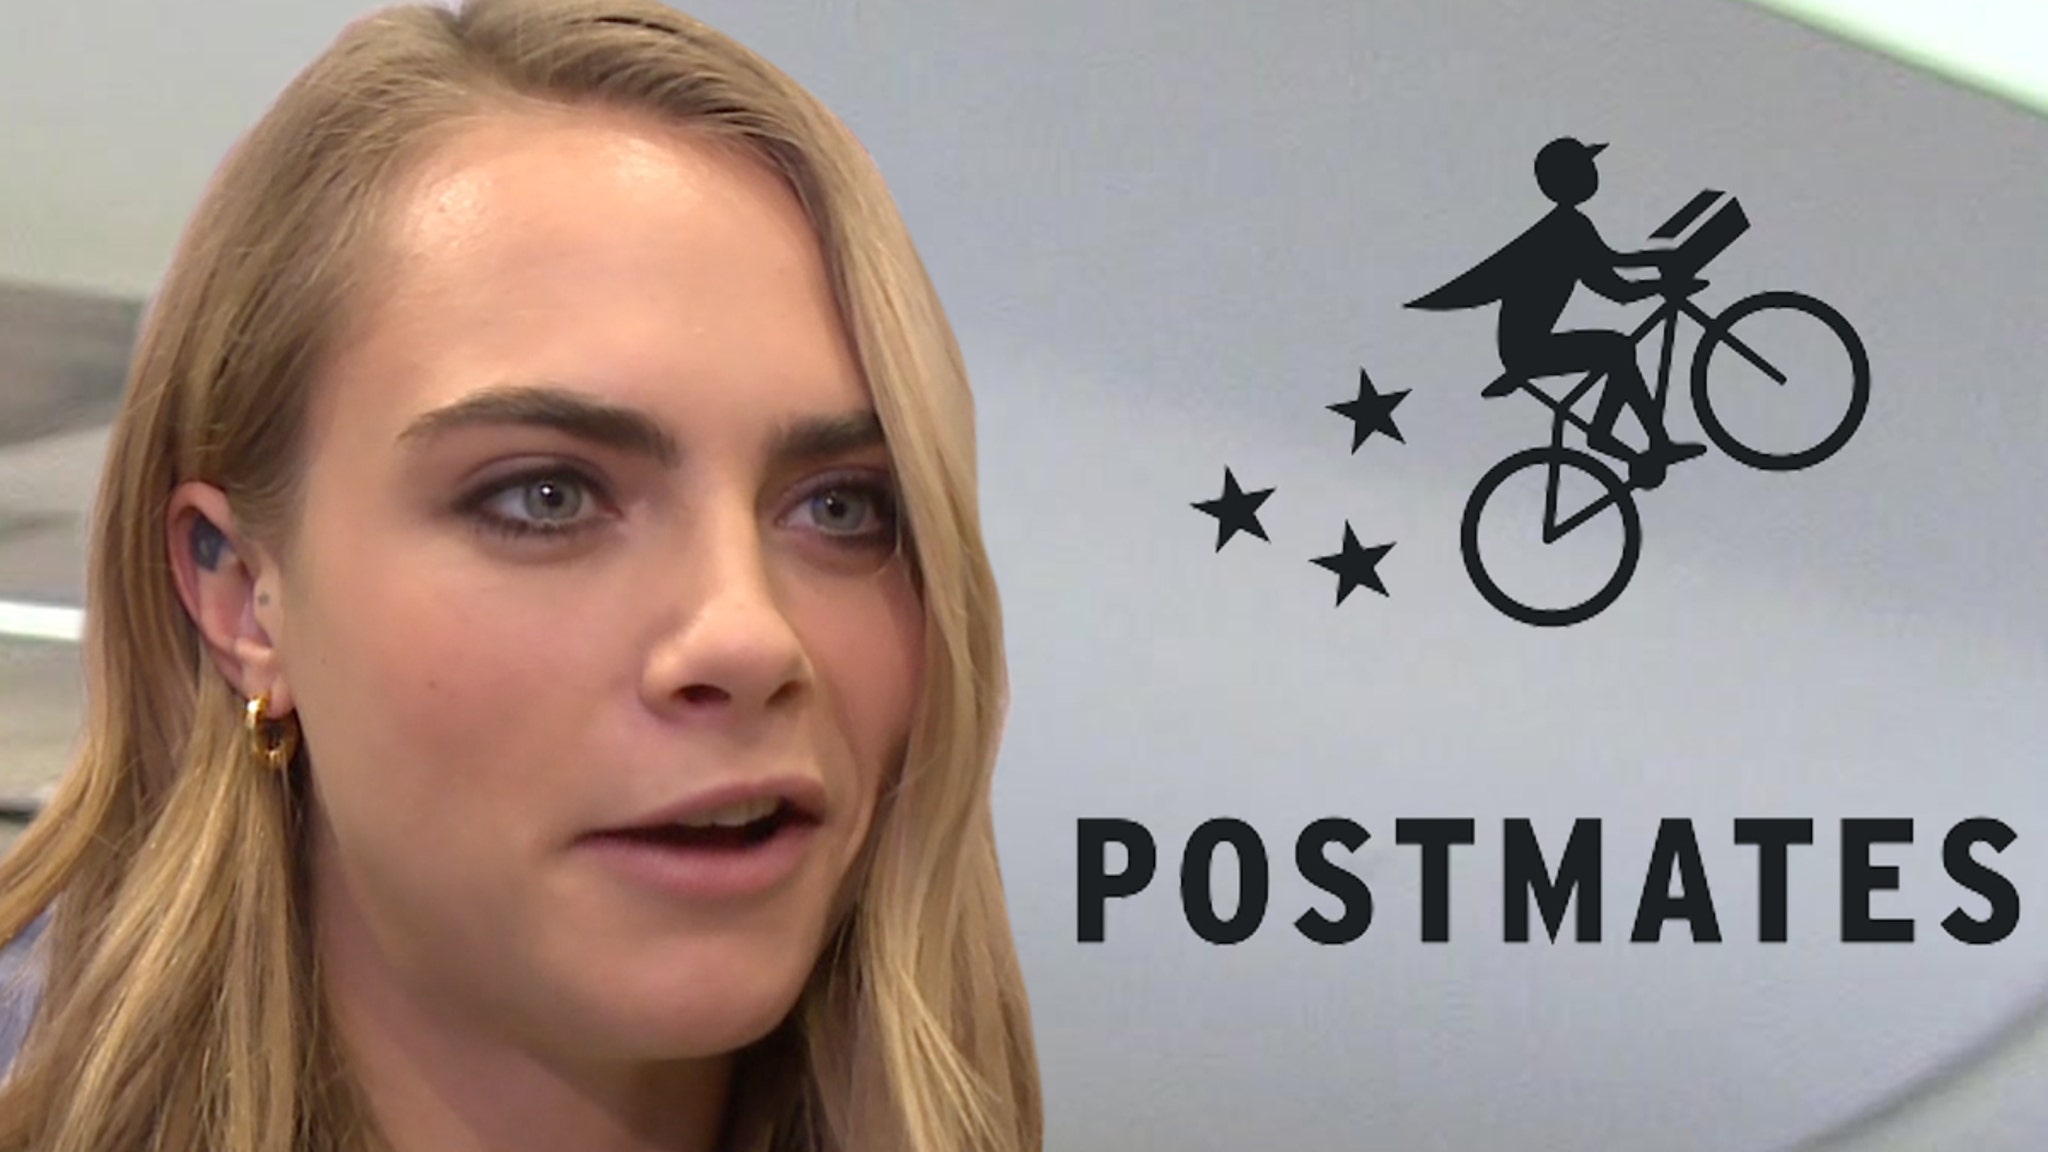 Cara Delevingne Has Dropped $25,000 On Postmates Since 2014